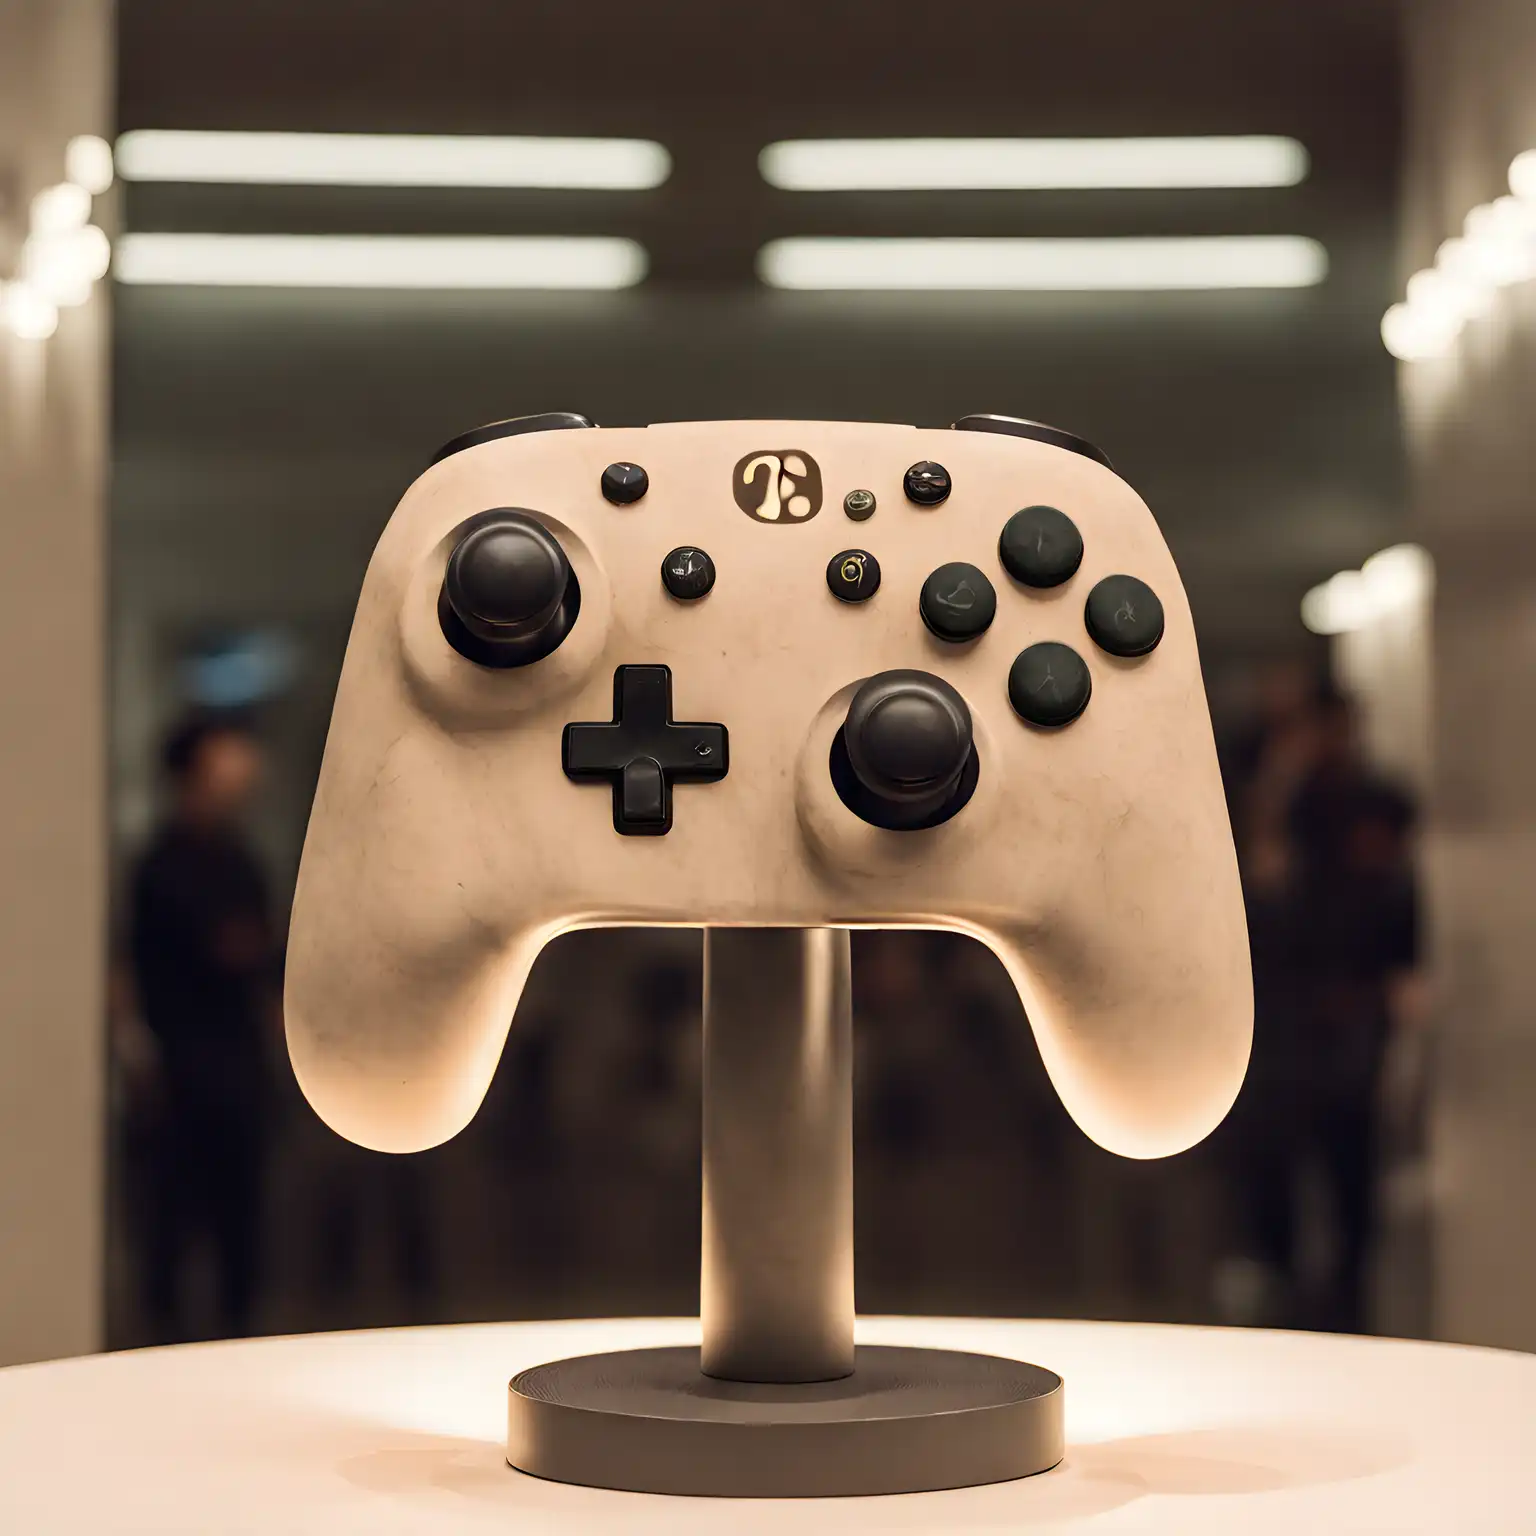 A close up of a controller on a table